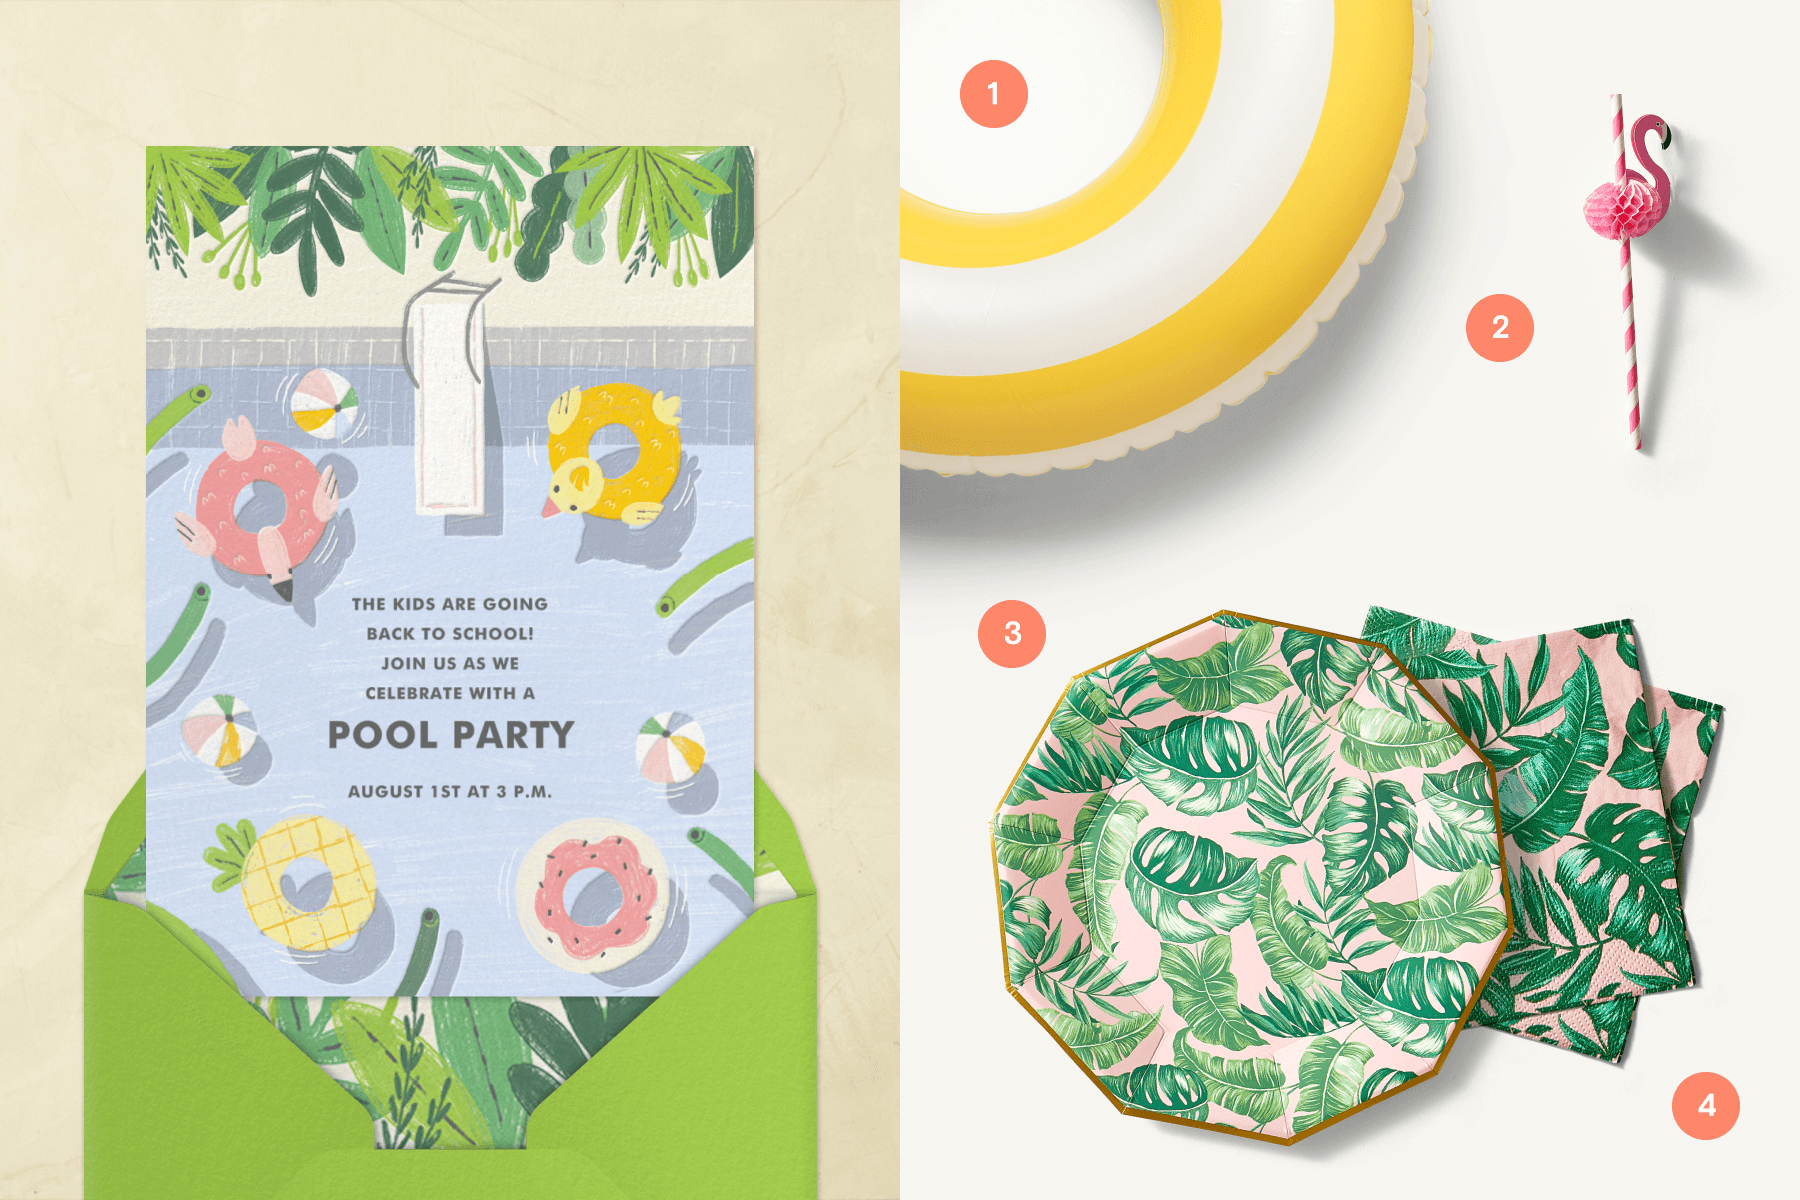 Left: A pool party invitation shows an illustration of a pool from above with a diving board and fun pool floats. Right: A yellow and white striped pool float, a paper plate with monstera leaves and matching cocktail napkins, and a striped pink straw with a paper flamingo attached.